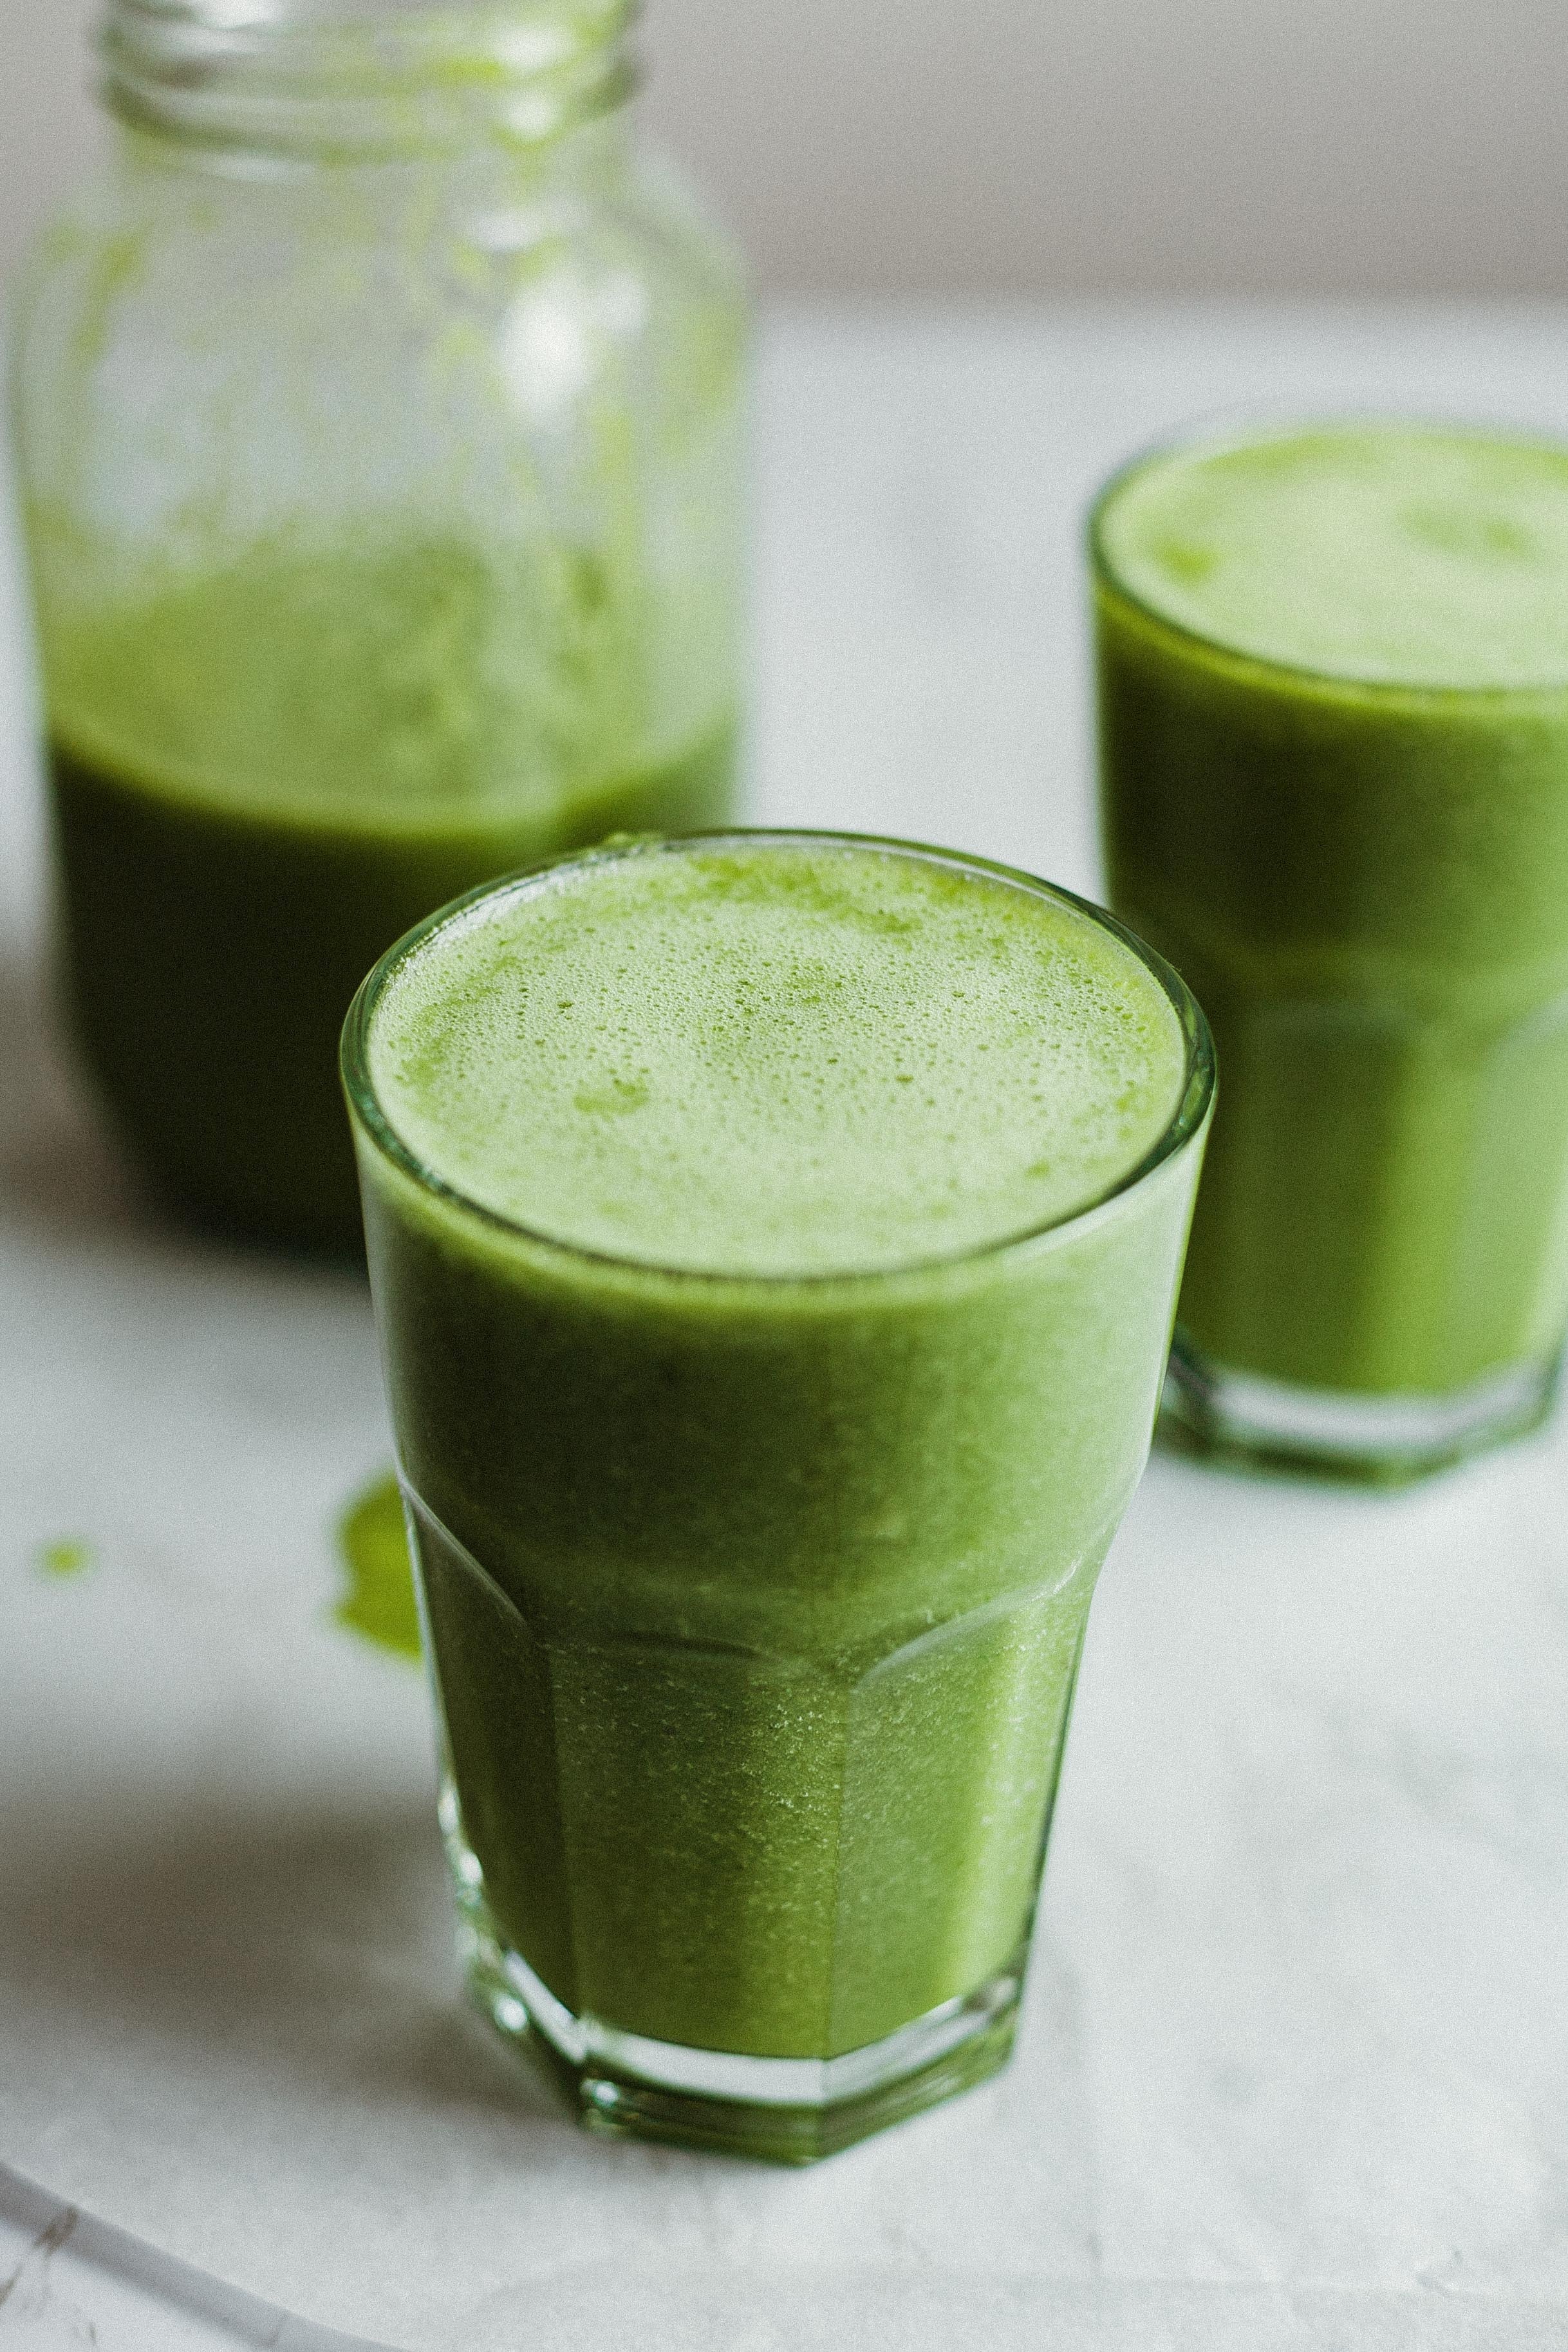 Our favorite green smoothie recipe